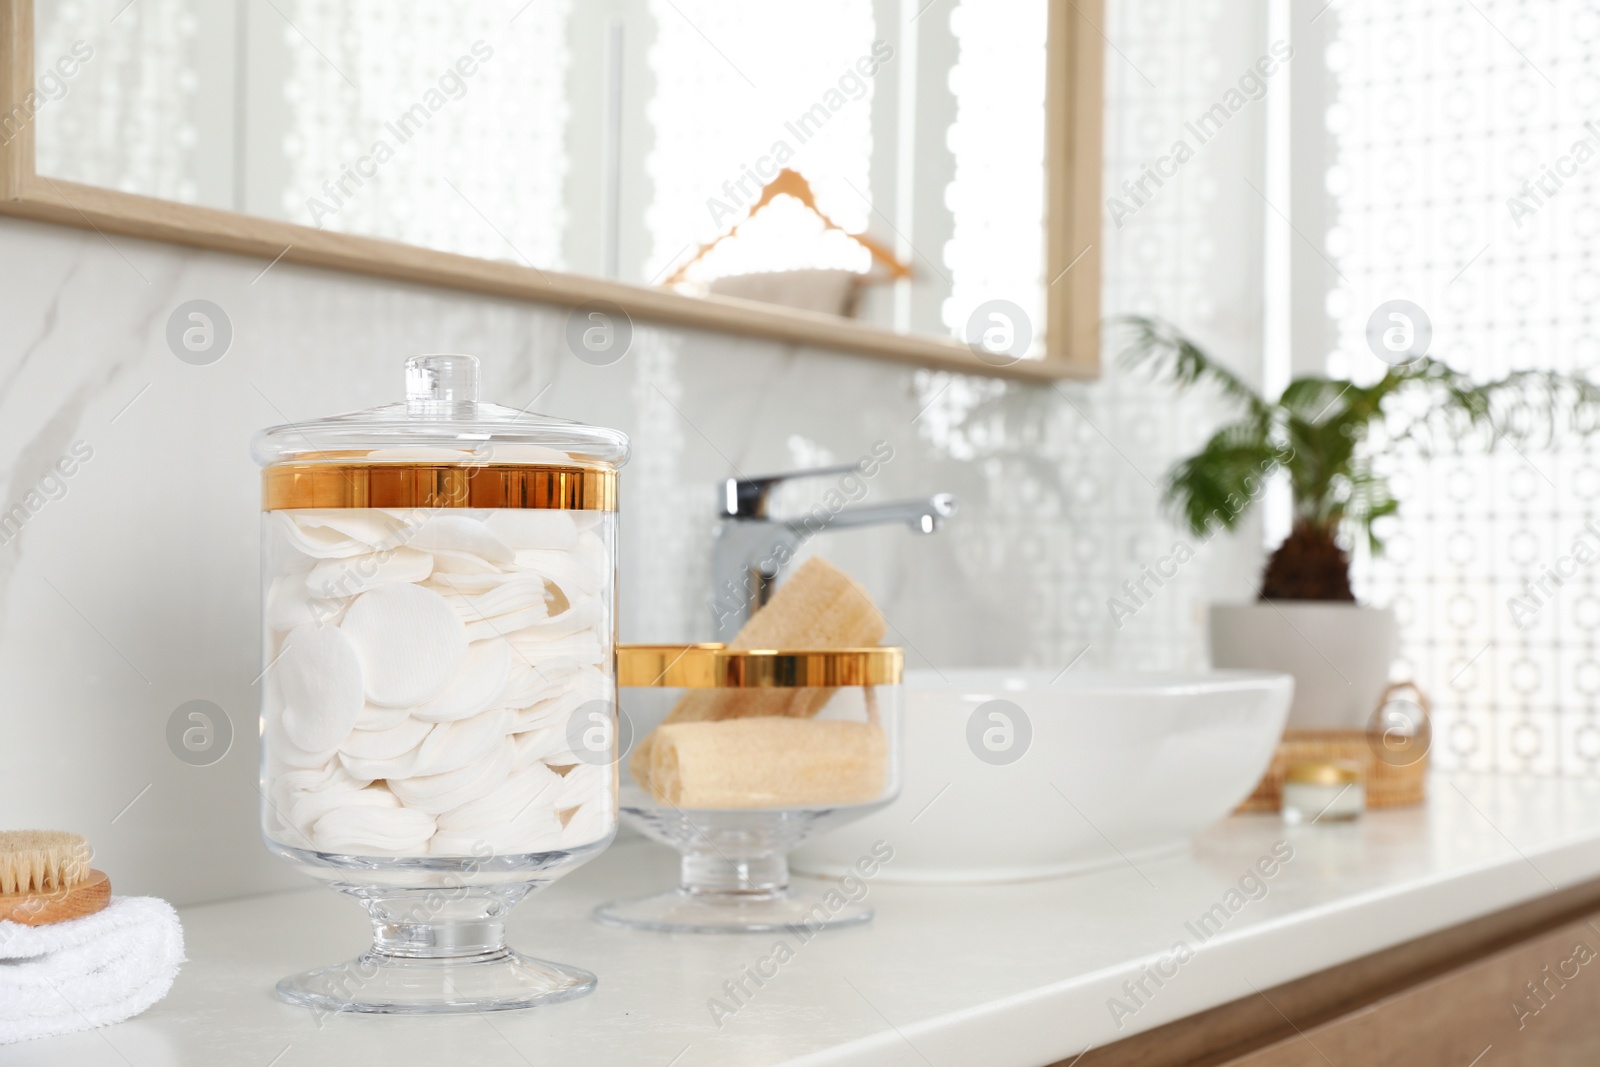 Photo of Jars with cotton pads and loofah sponges on bathroom countertop